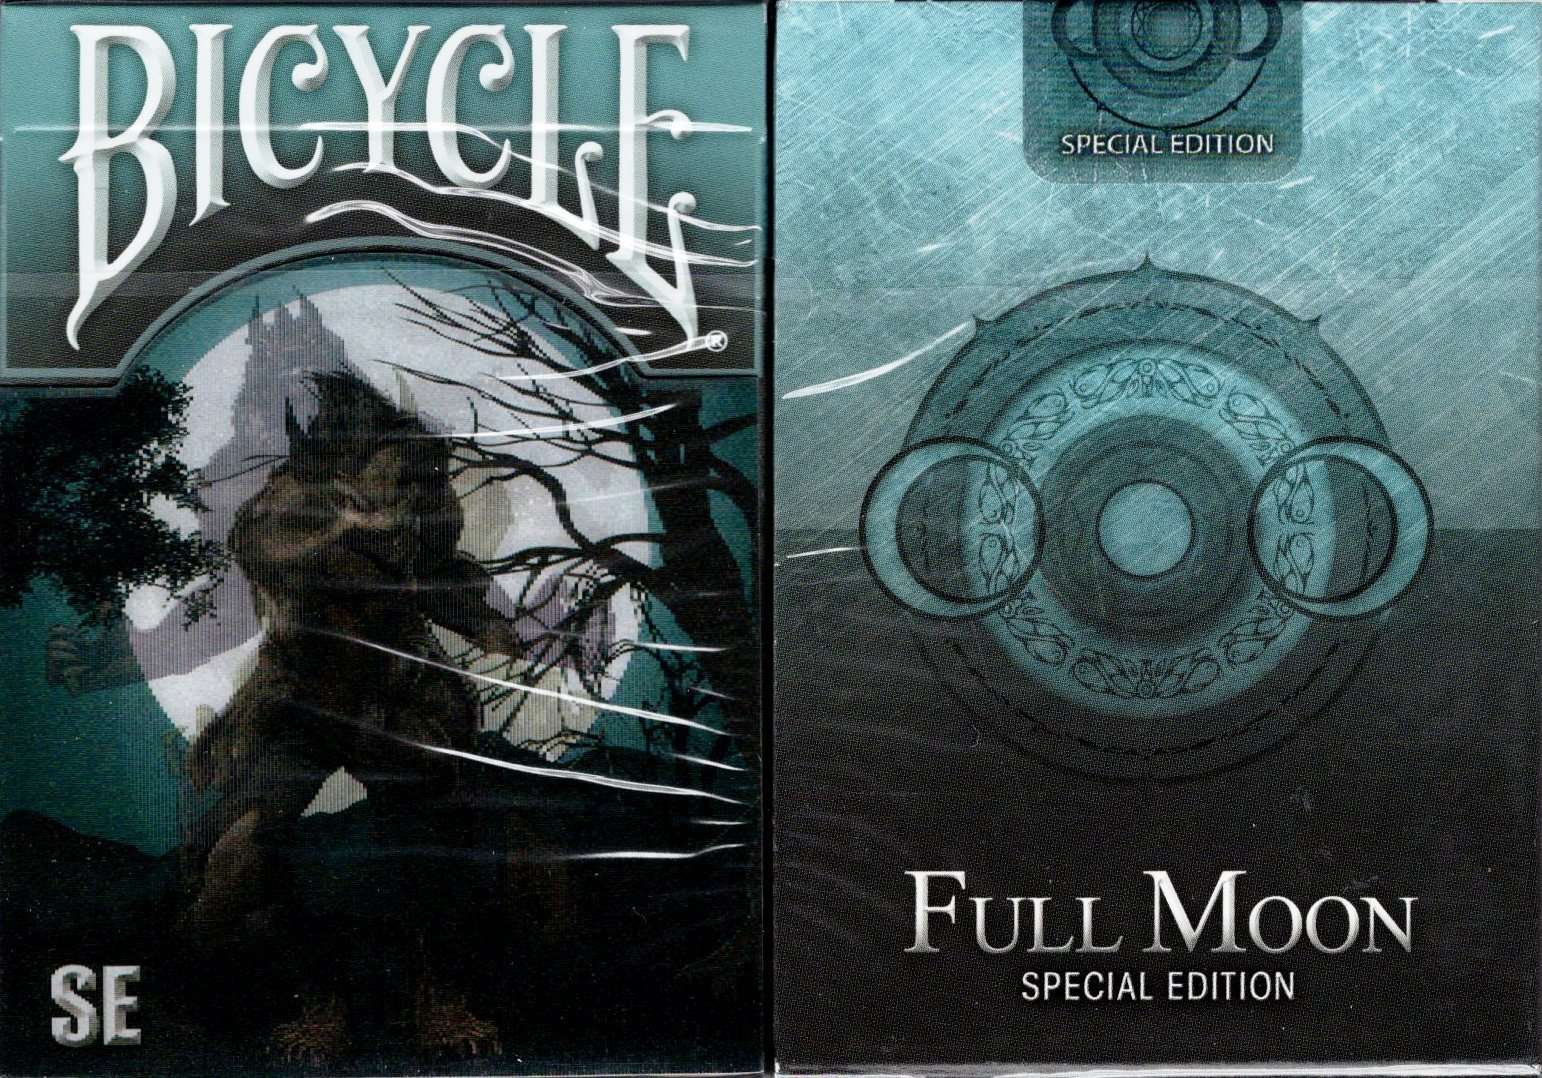 PlayingCardDecks.com-Werewolf Full Moon Special Edition Bicycle Playing Cards Deck